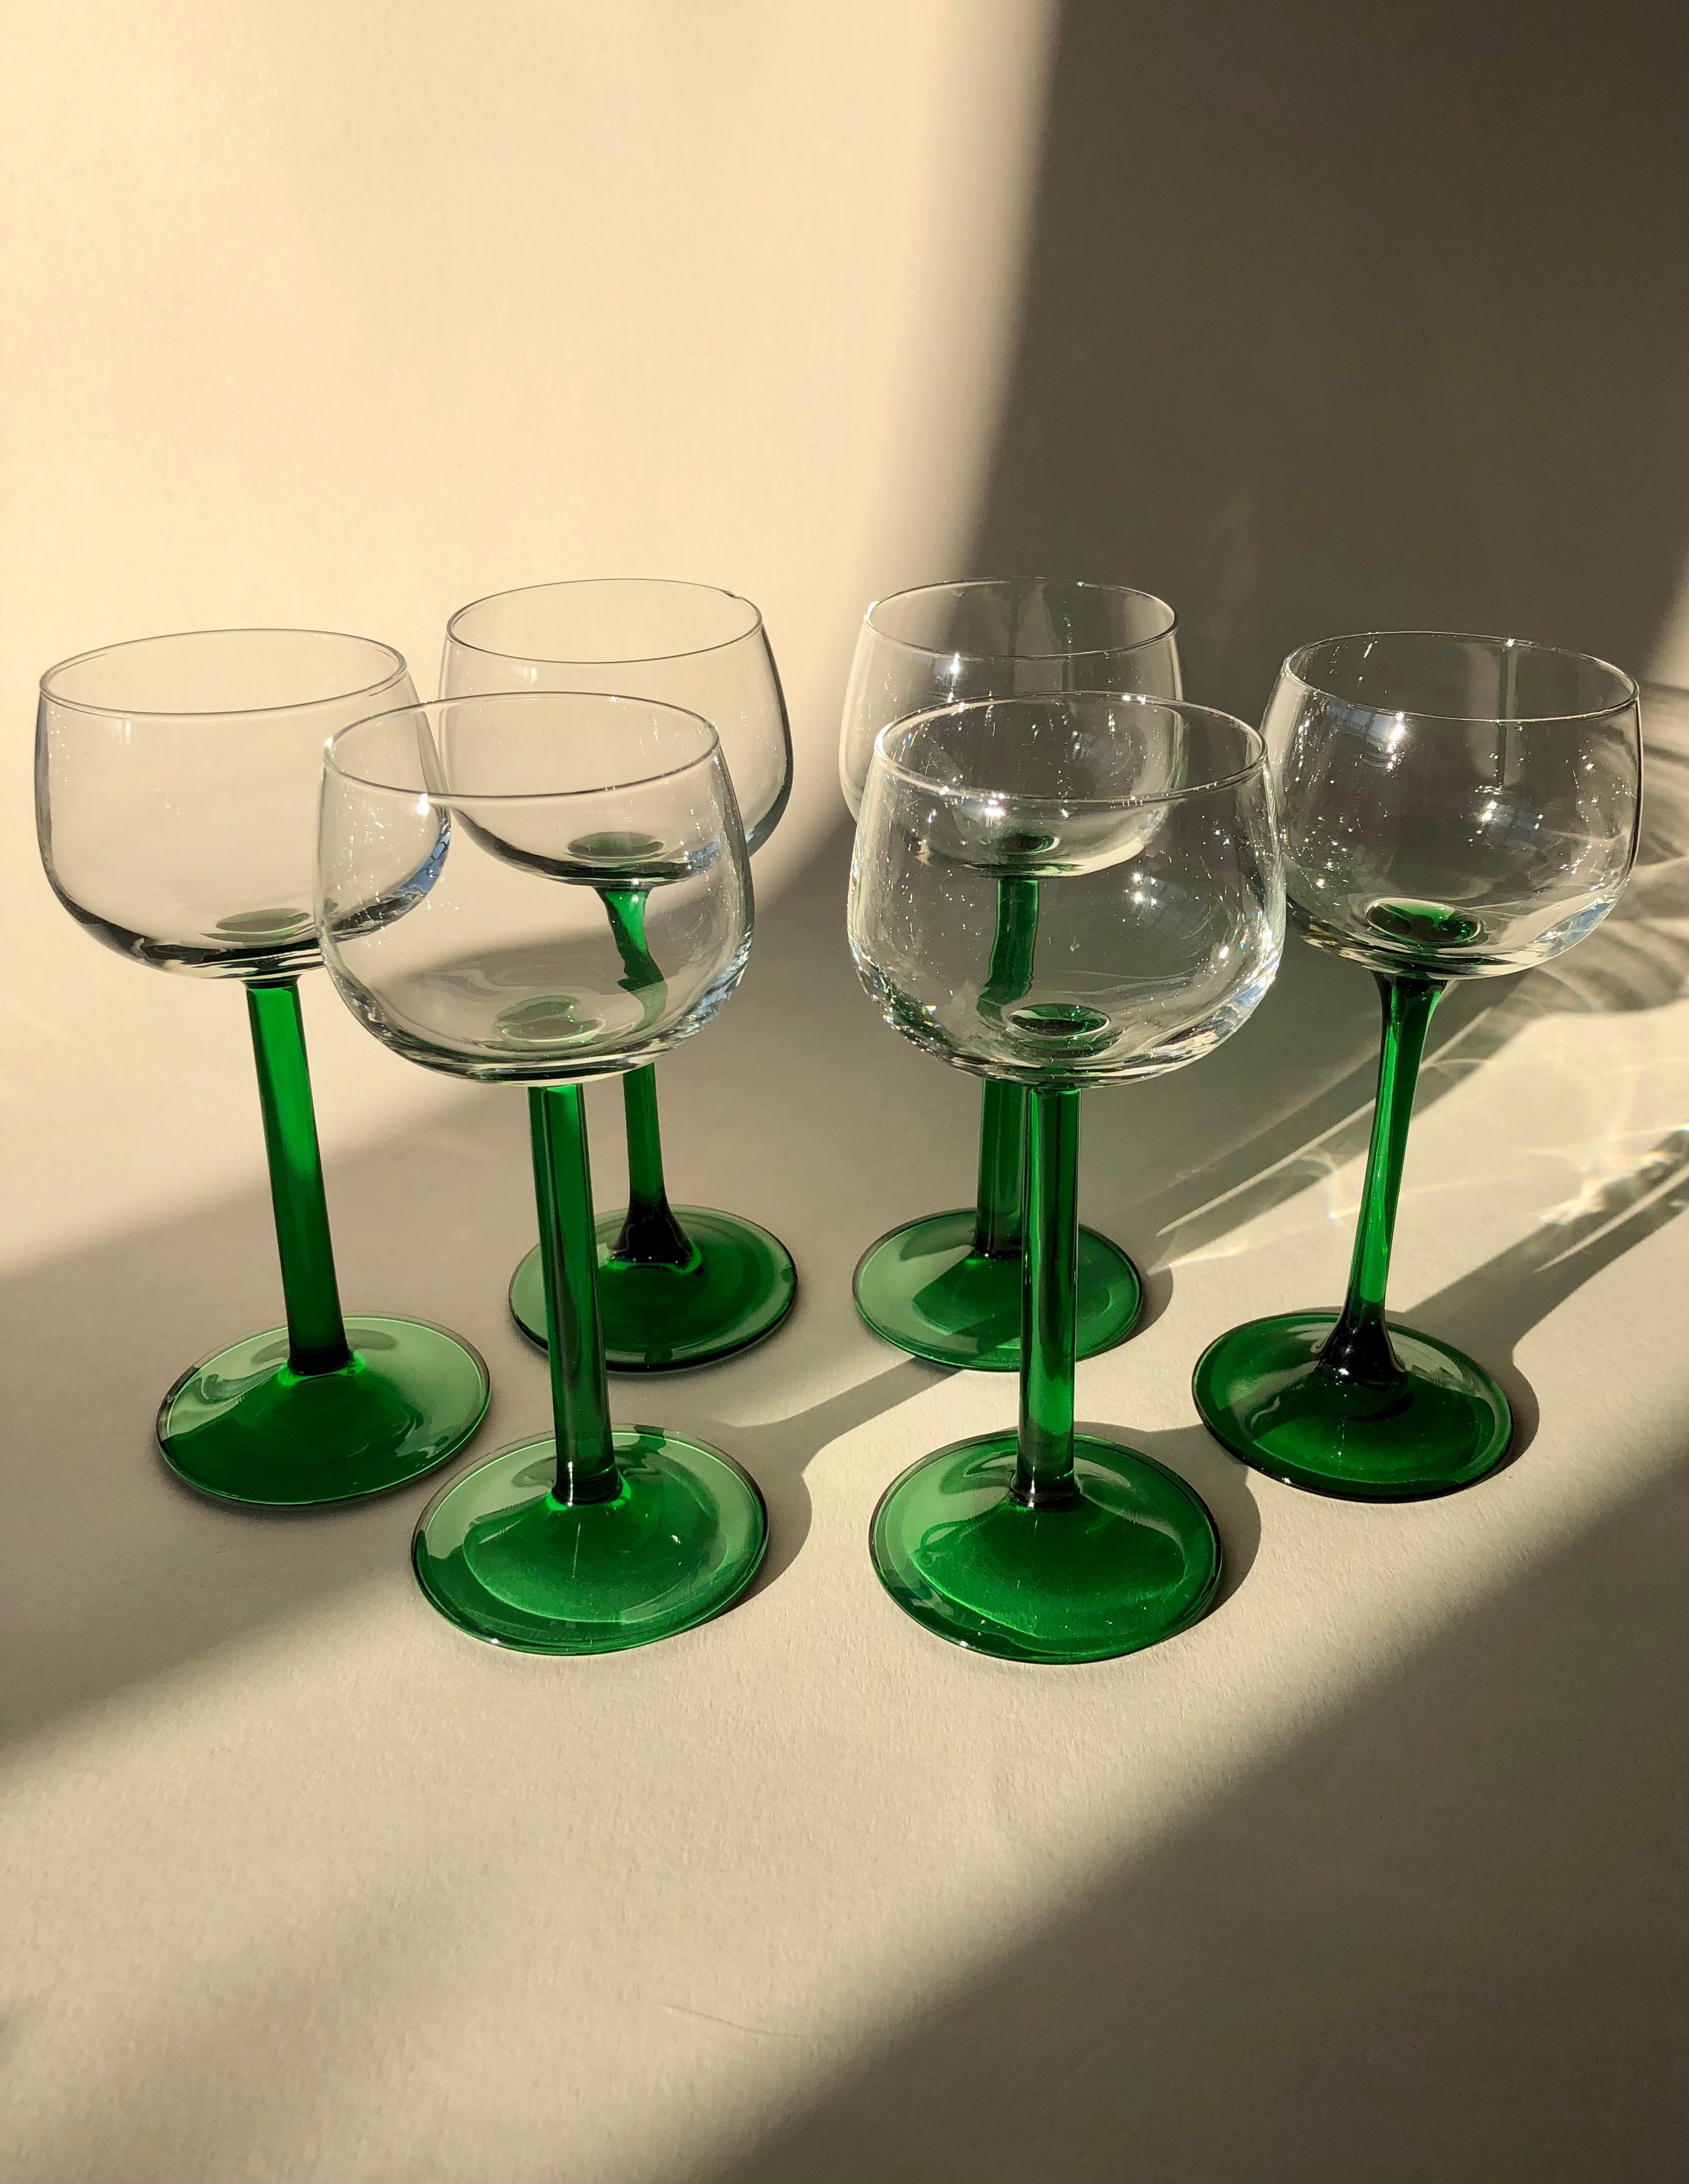 1970s VINTAGE SET OF 6 LUMINARC GREEN FRENCH GLASSES